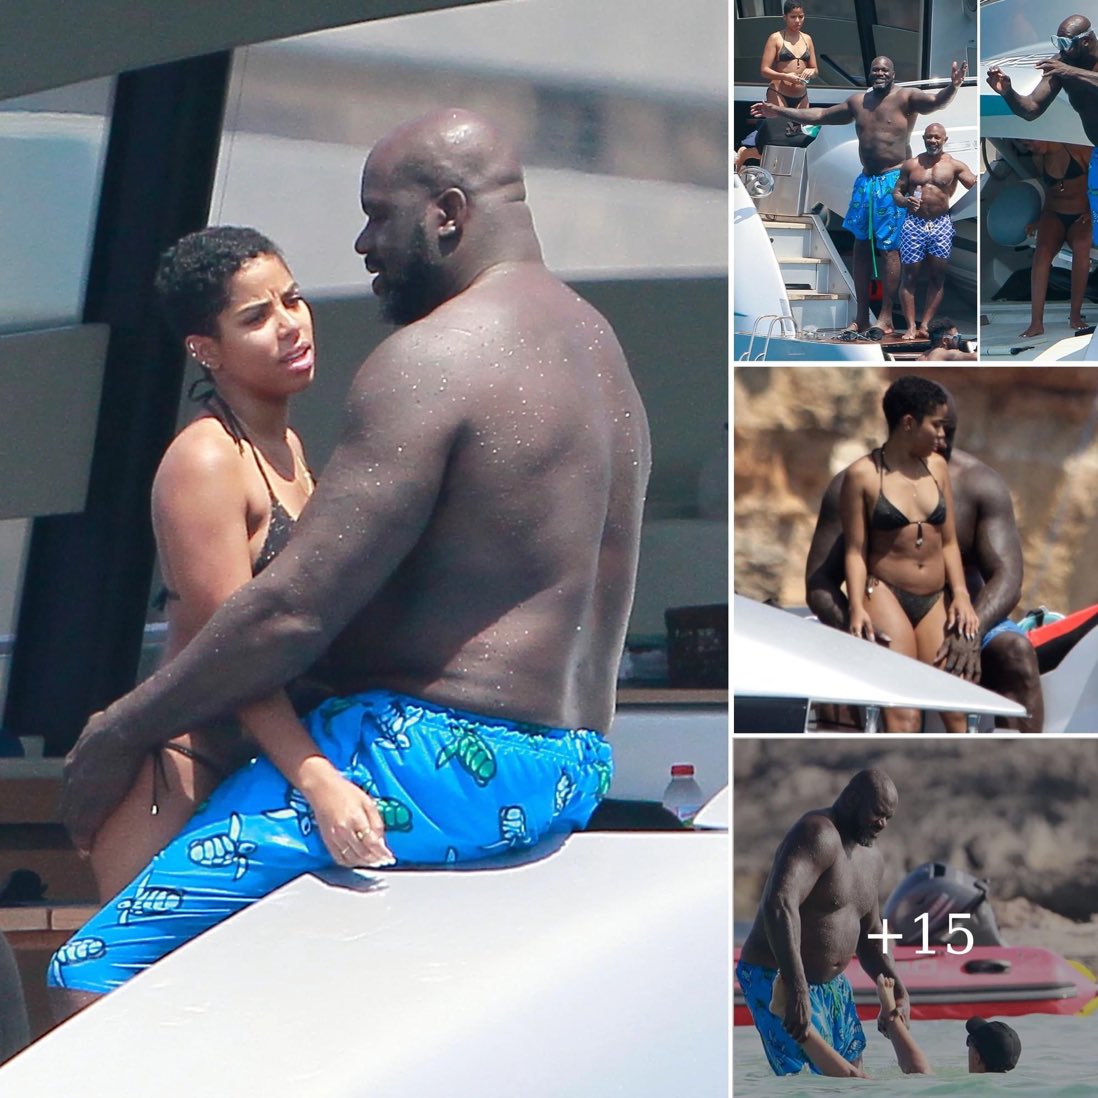 Age is just a number for Shaquille O'Neal! The NBA legend, 52, spotted enjoying Spain with his 21-year-old girlfriend. Love knows no bounds, and Shaq proves it with his adventurous spirit. Here's to living life to the fullest! 🌟💑 #ShaquilleONeal #LoveKnowsNoAge